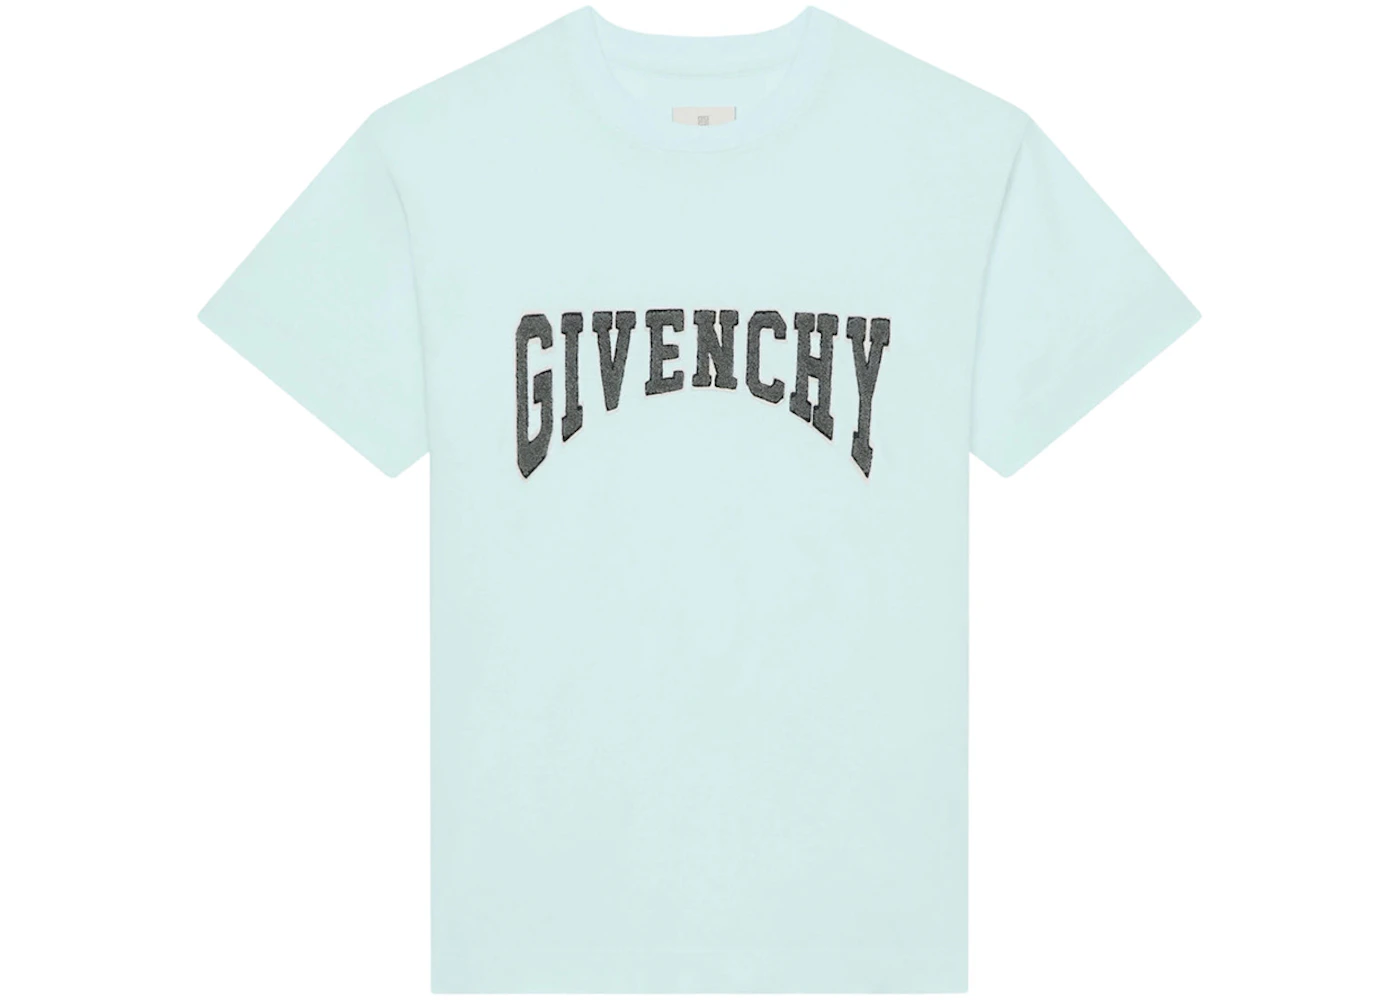 Givenchy Slim Fit Jersey With Patch T-Shirt Acqua Marine Men's - US